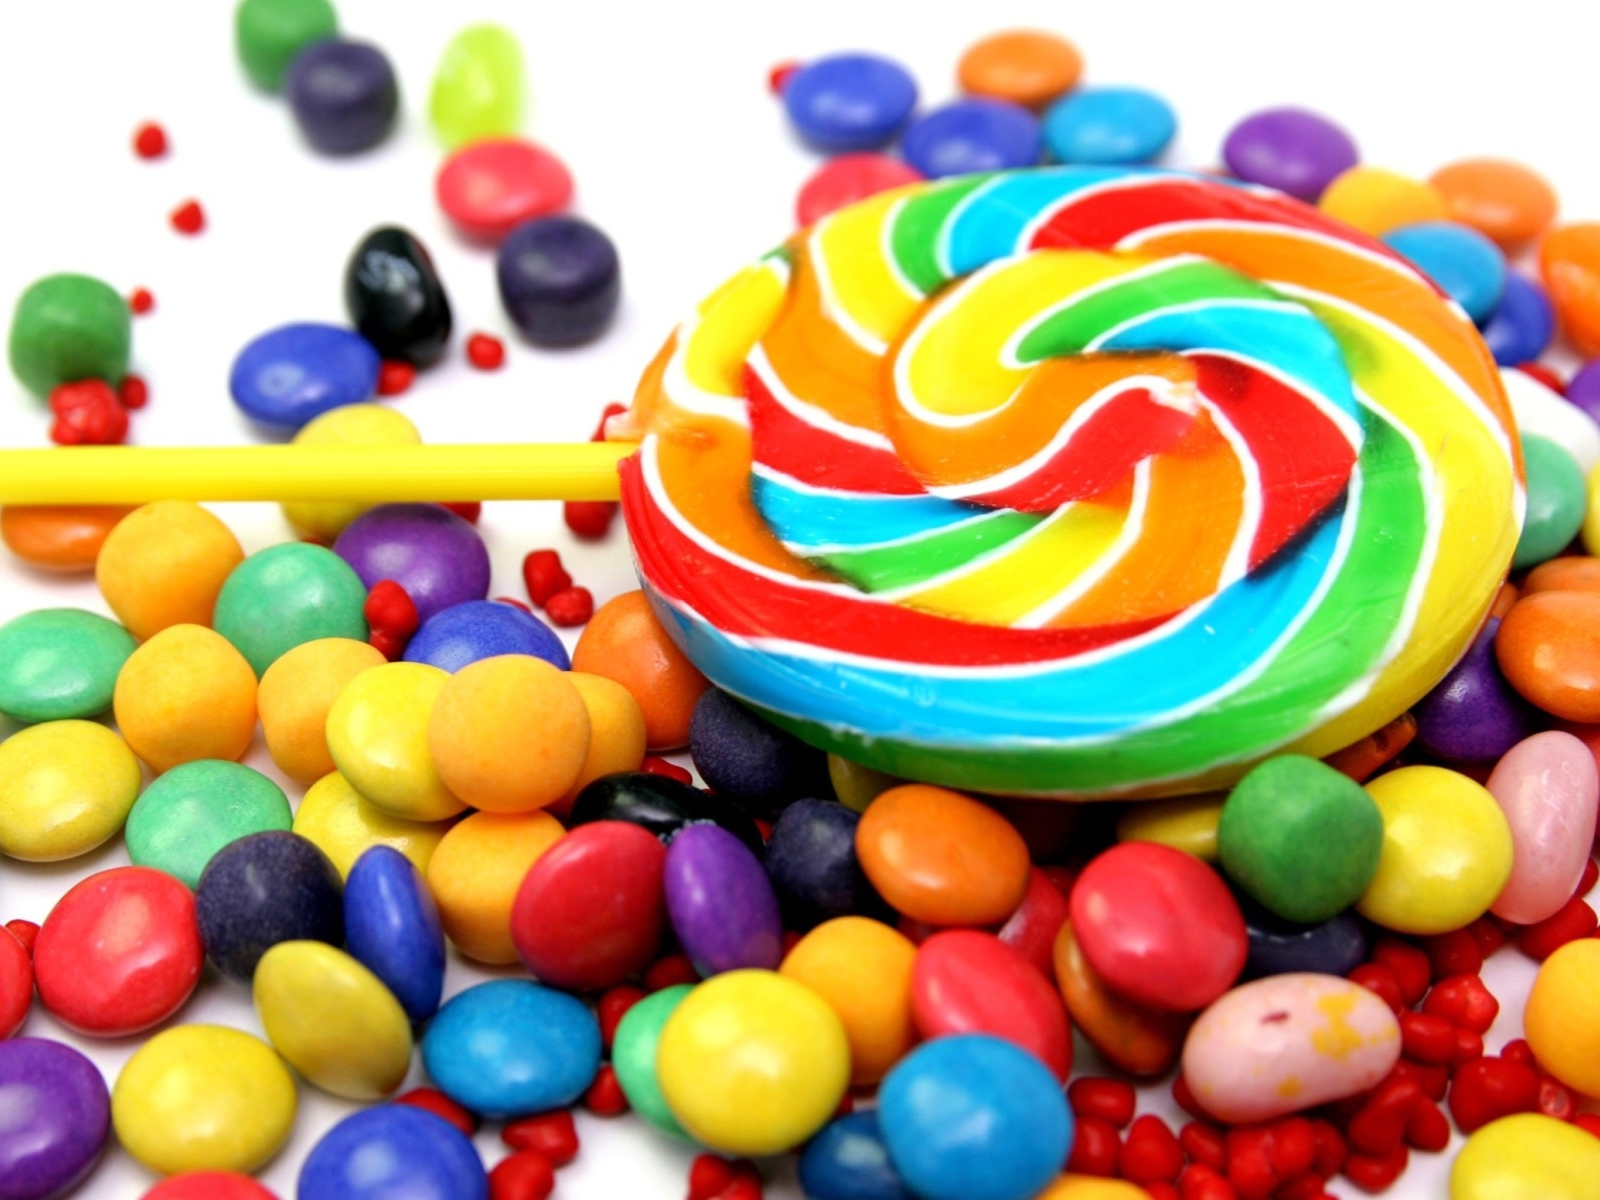 Colorful Candies wallpaper 1600x1200